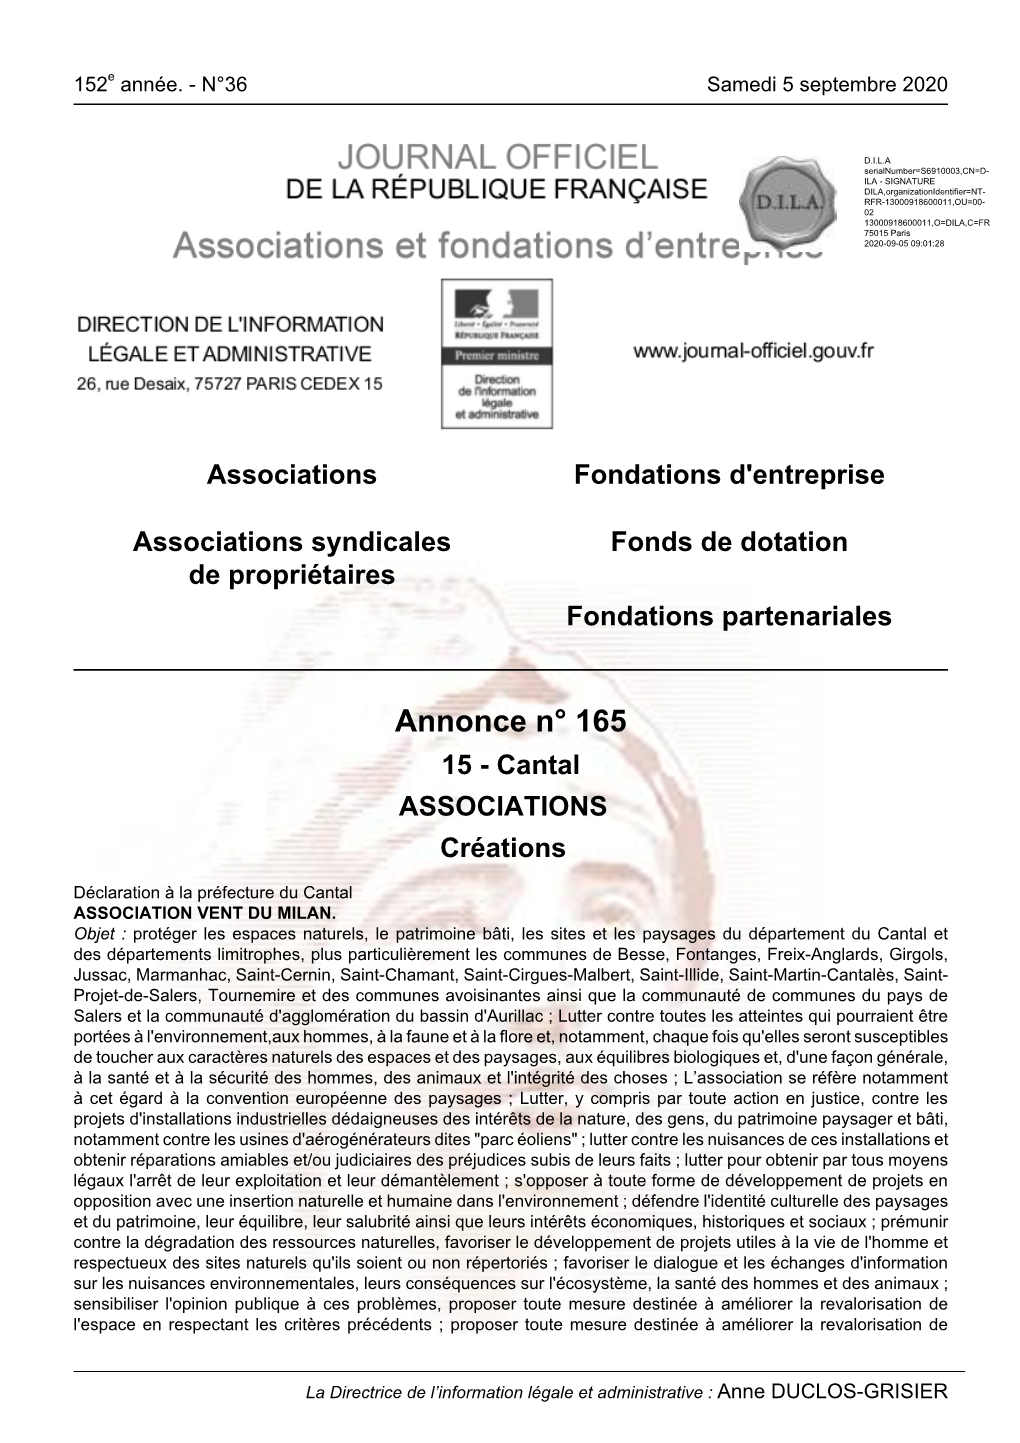 Annonce N° 165 15 - Cantal ASSOCIATIONS Créations